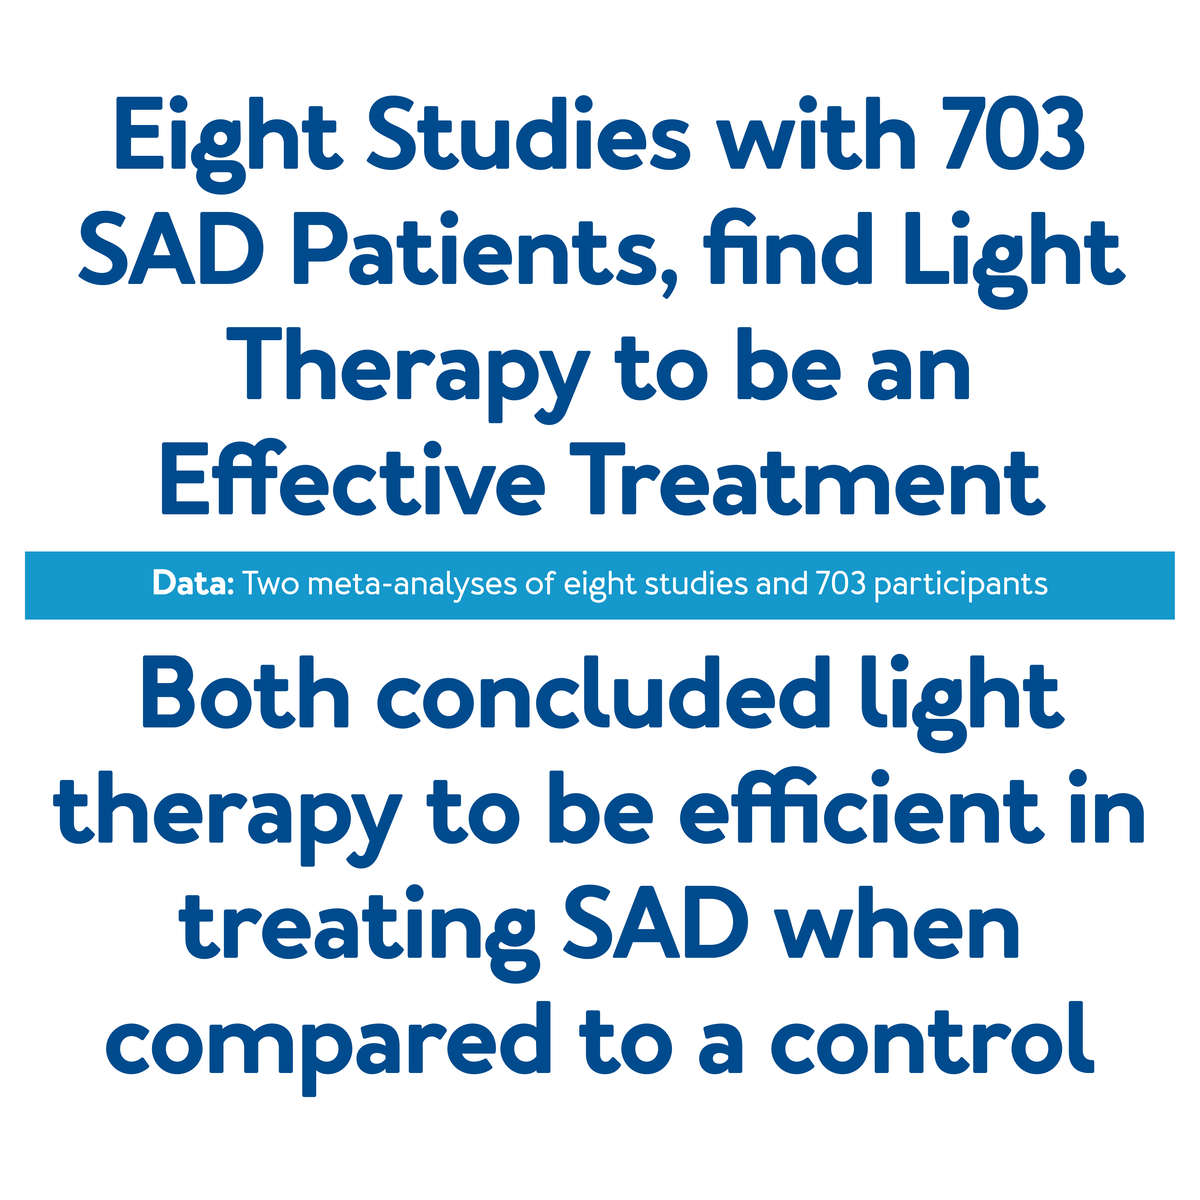 Eight studies with 703 SAD patients find light therapy to be an effective treatment, further details are provided below.